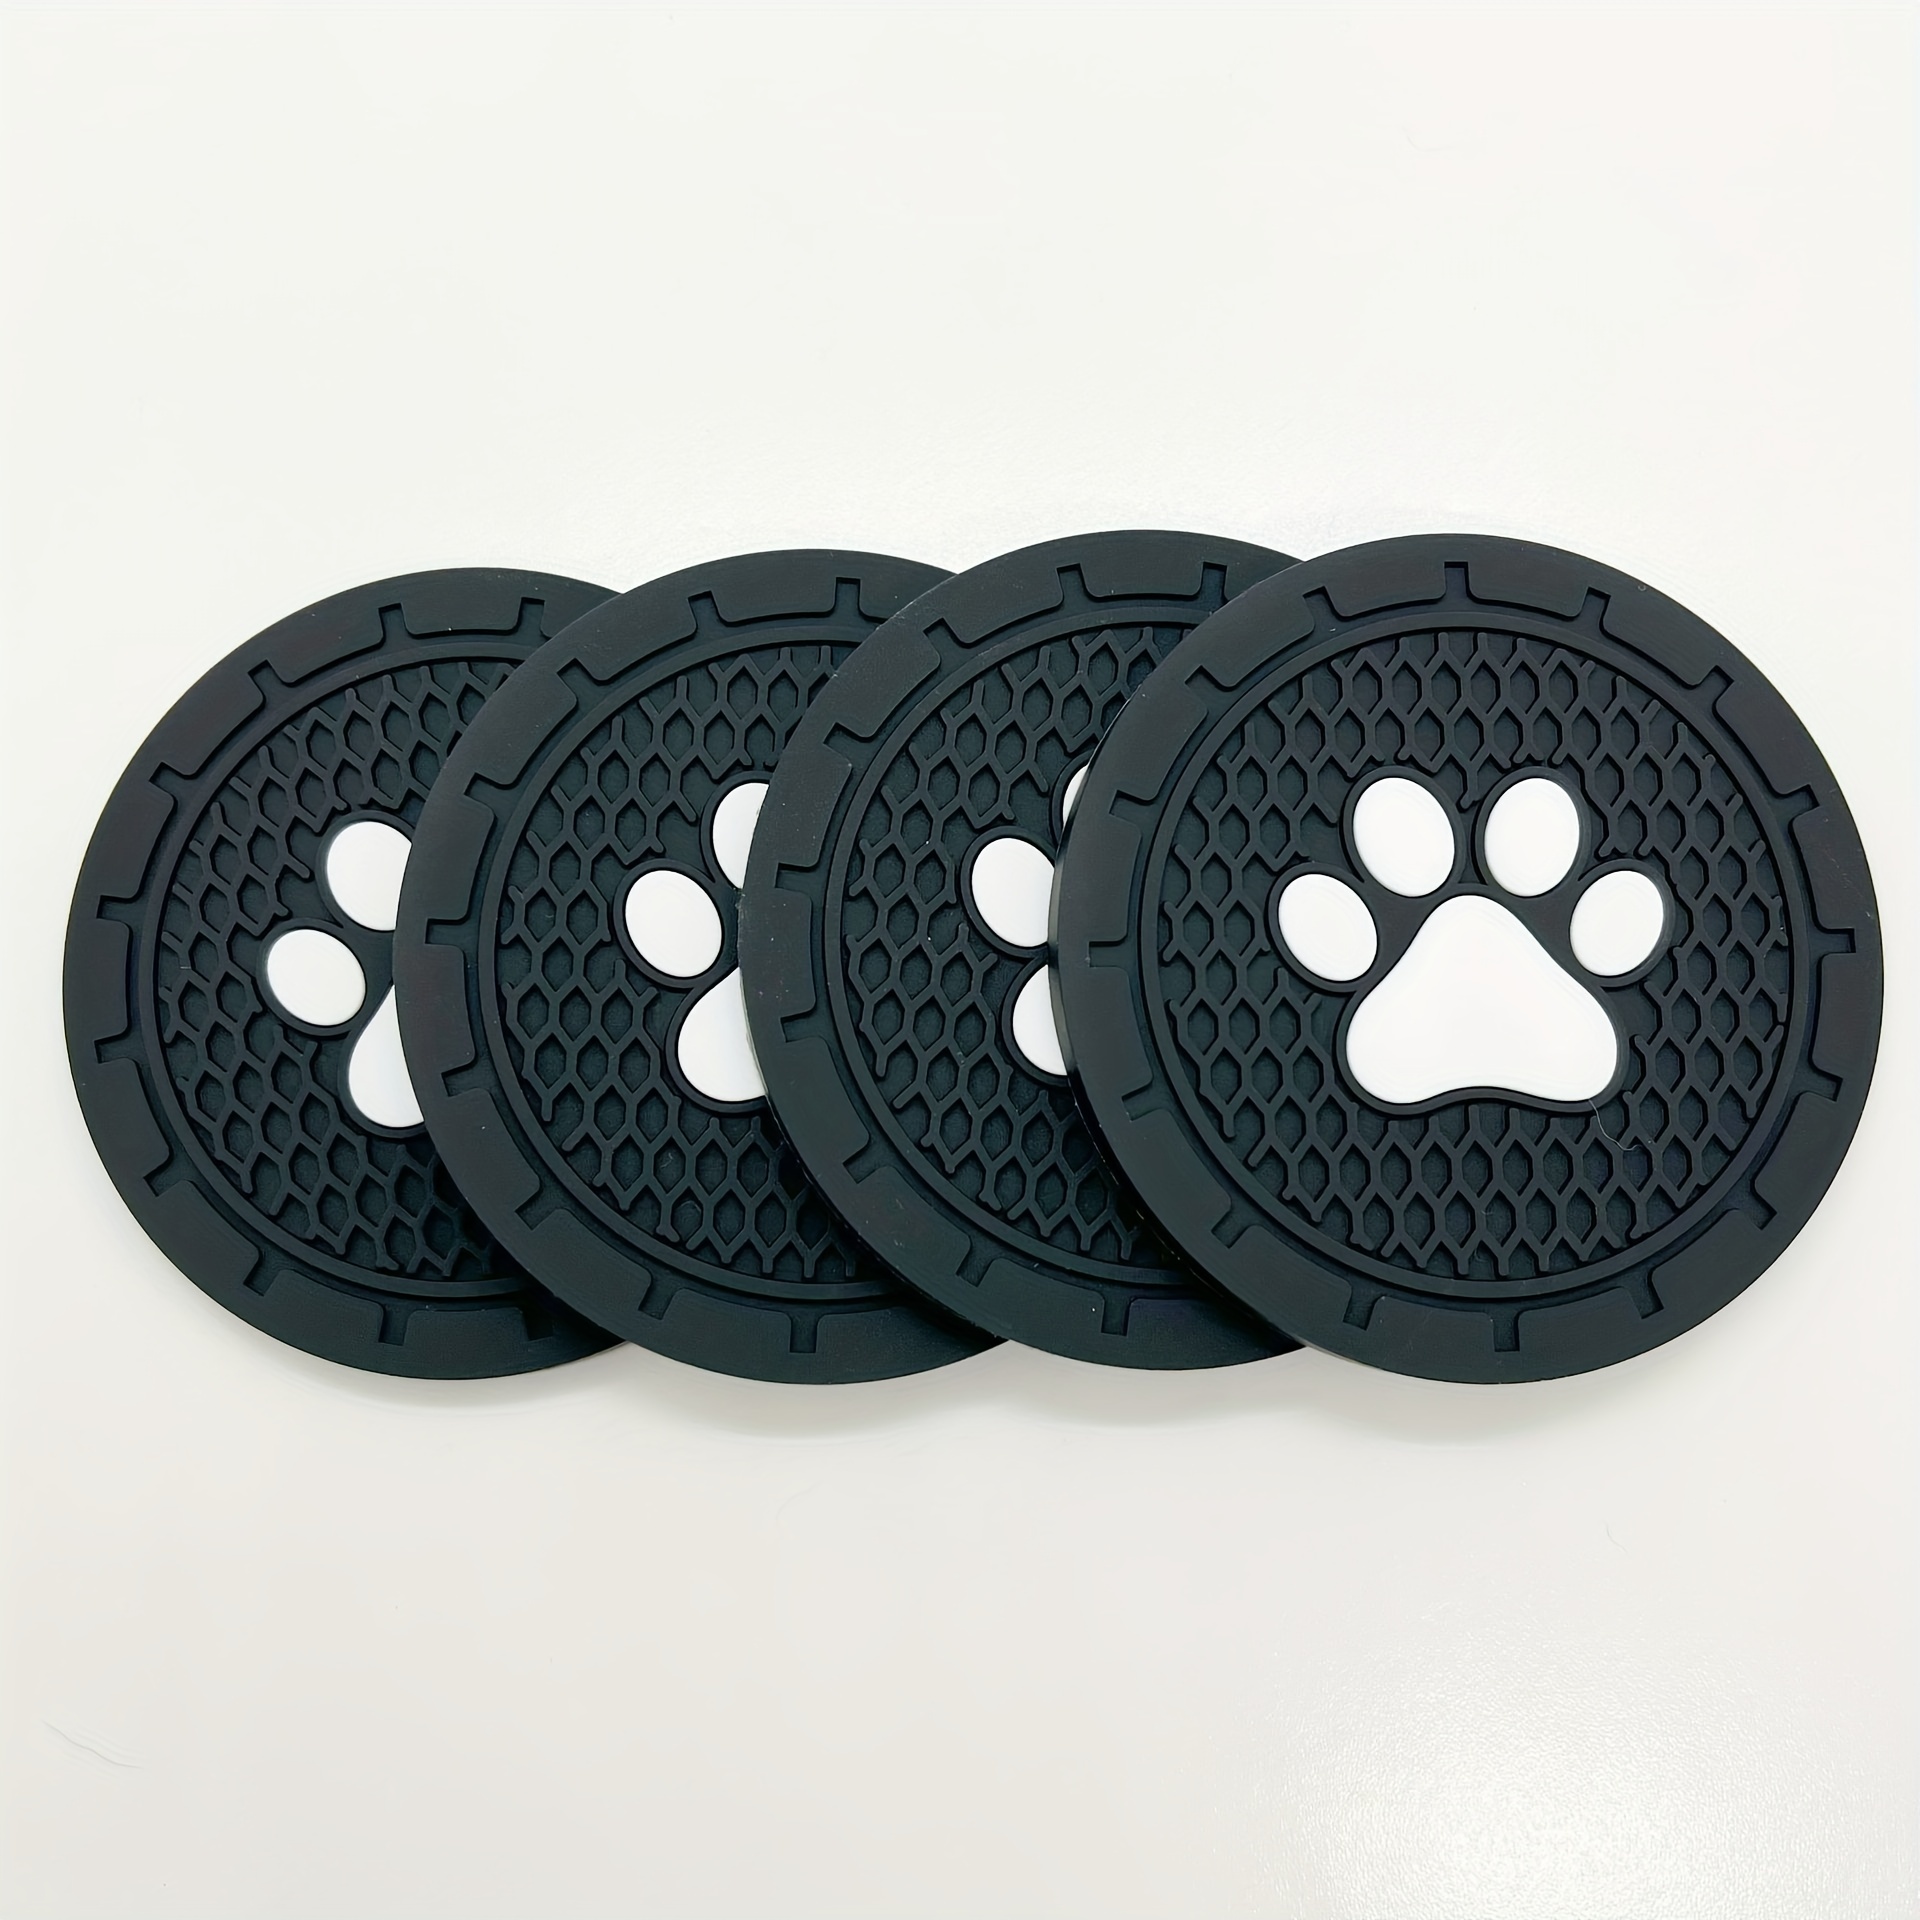 4 Packs Paw Car Coasters Car Cup Holder Coasters Silicone Anti